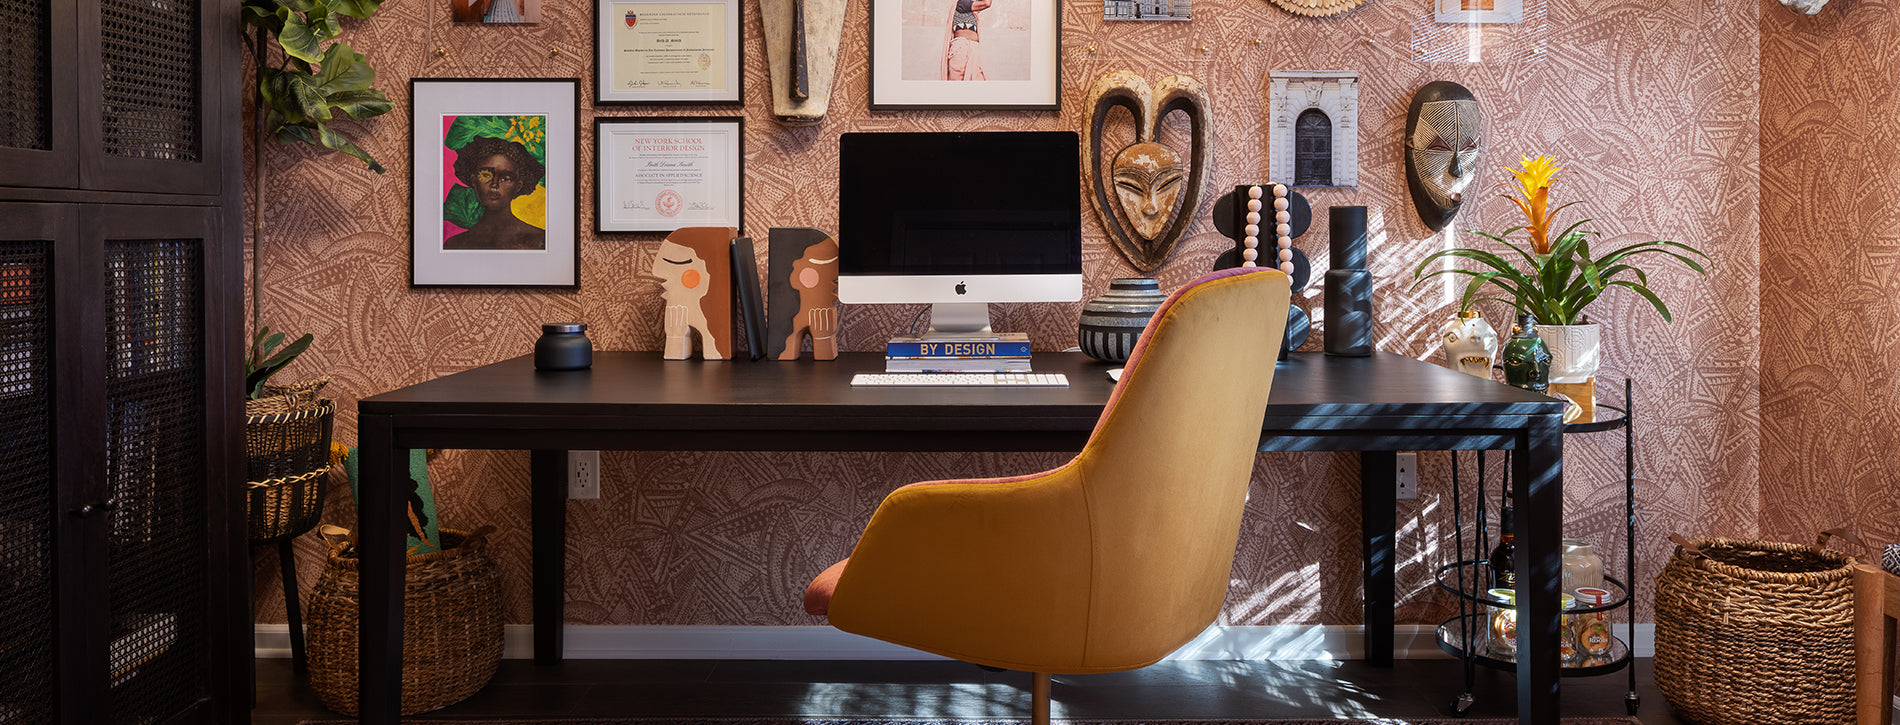 6 Home Office Design Ideas for Productivity (-1) - Shopify USA